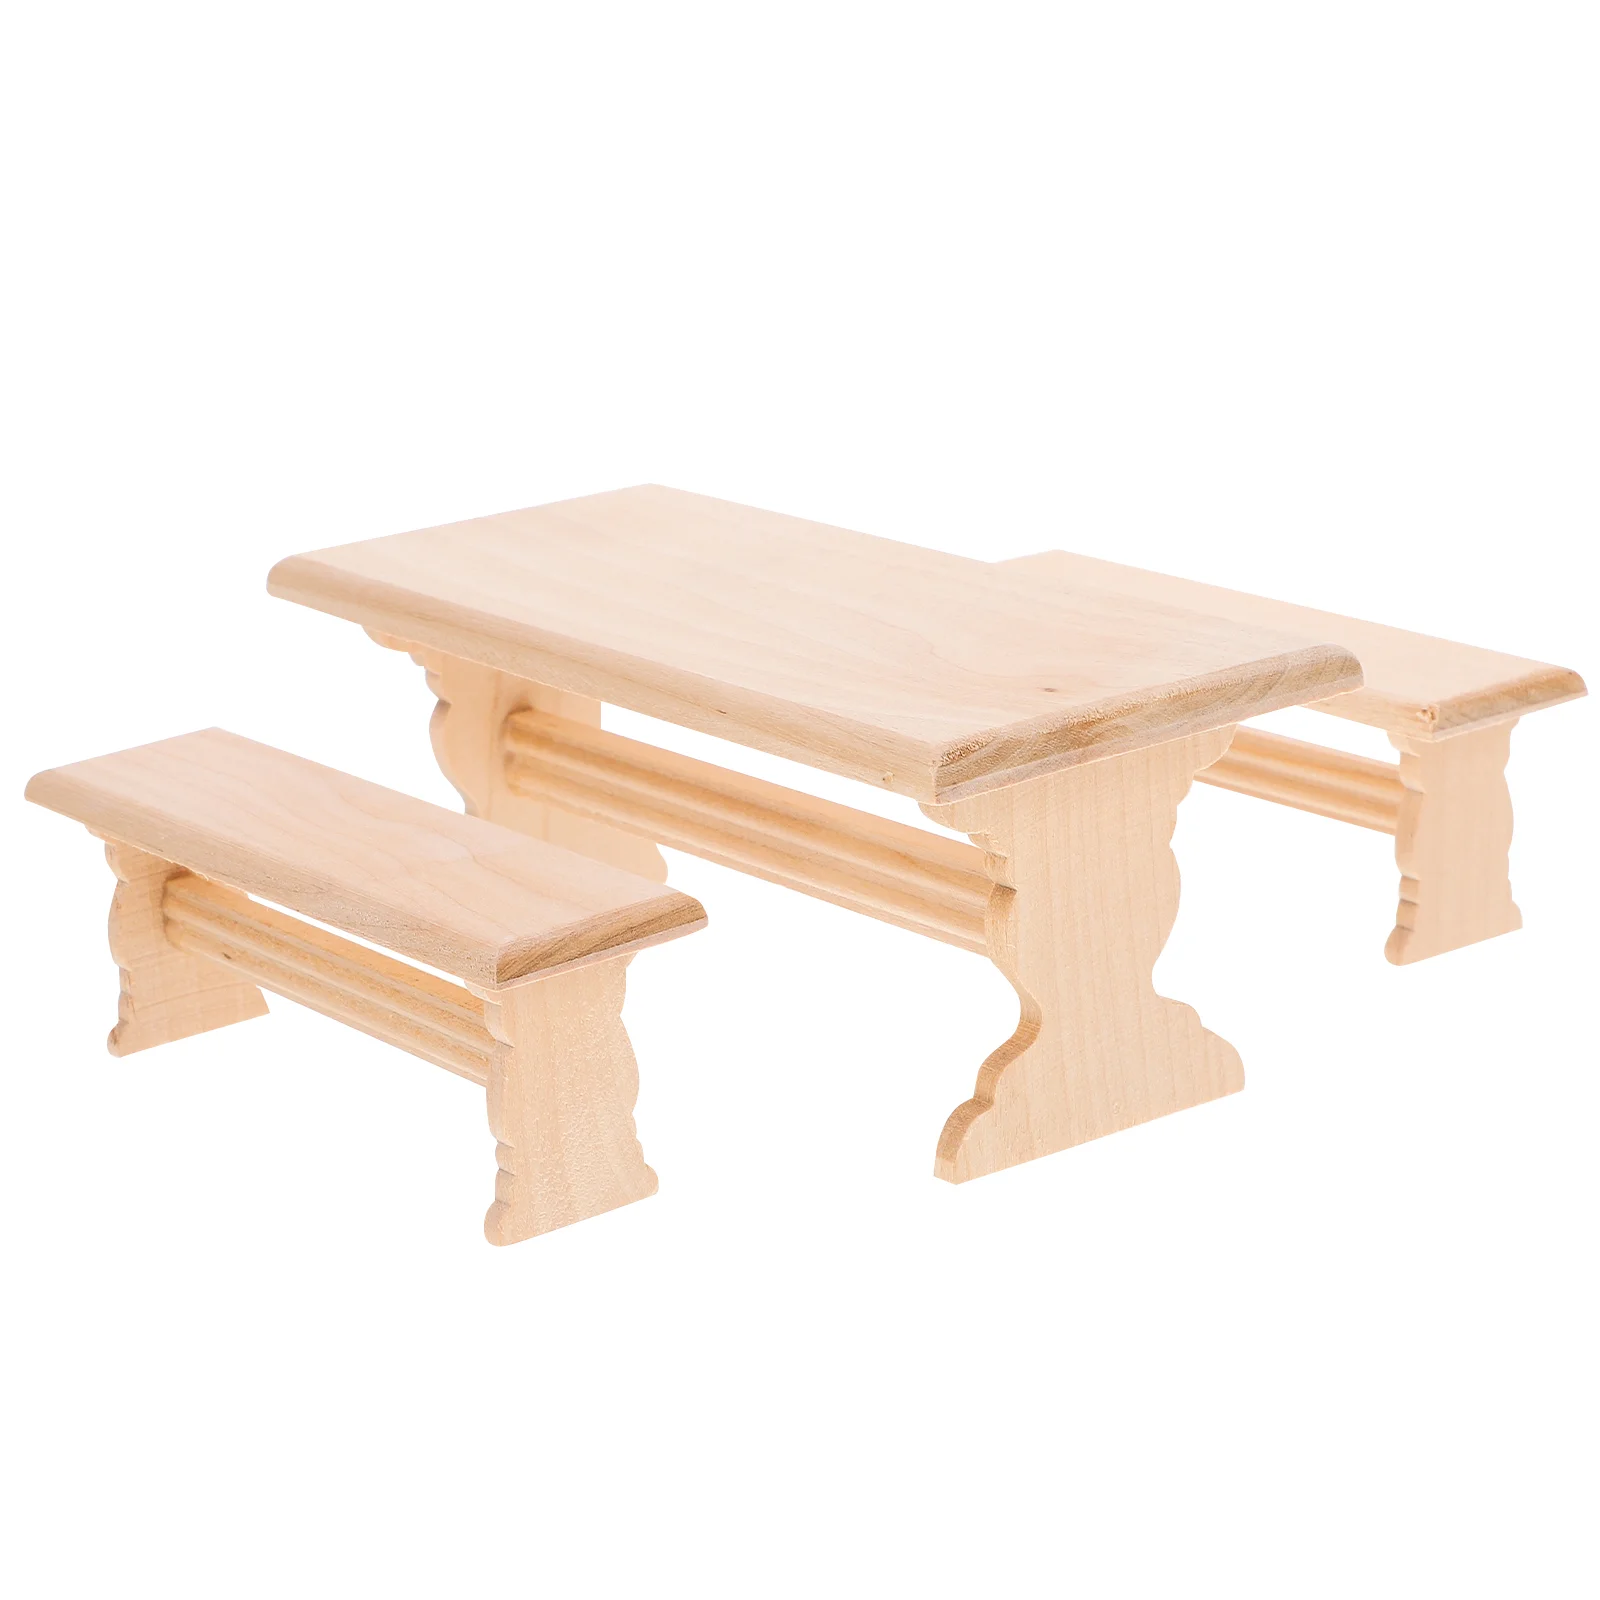 

1 Set of Wooden Table Bench Set Model Dollhouse Miniature Wooden Furnitures Wooden Mini Model